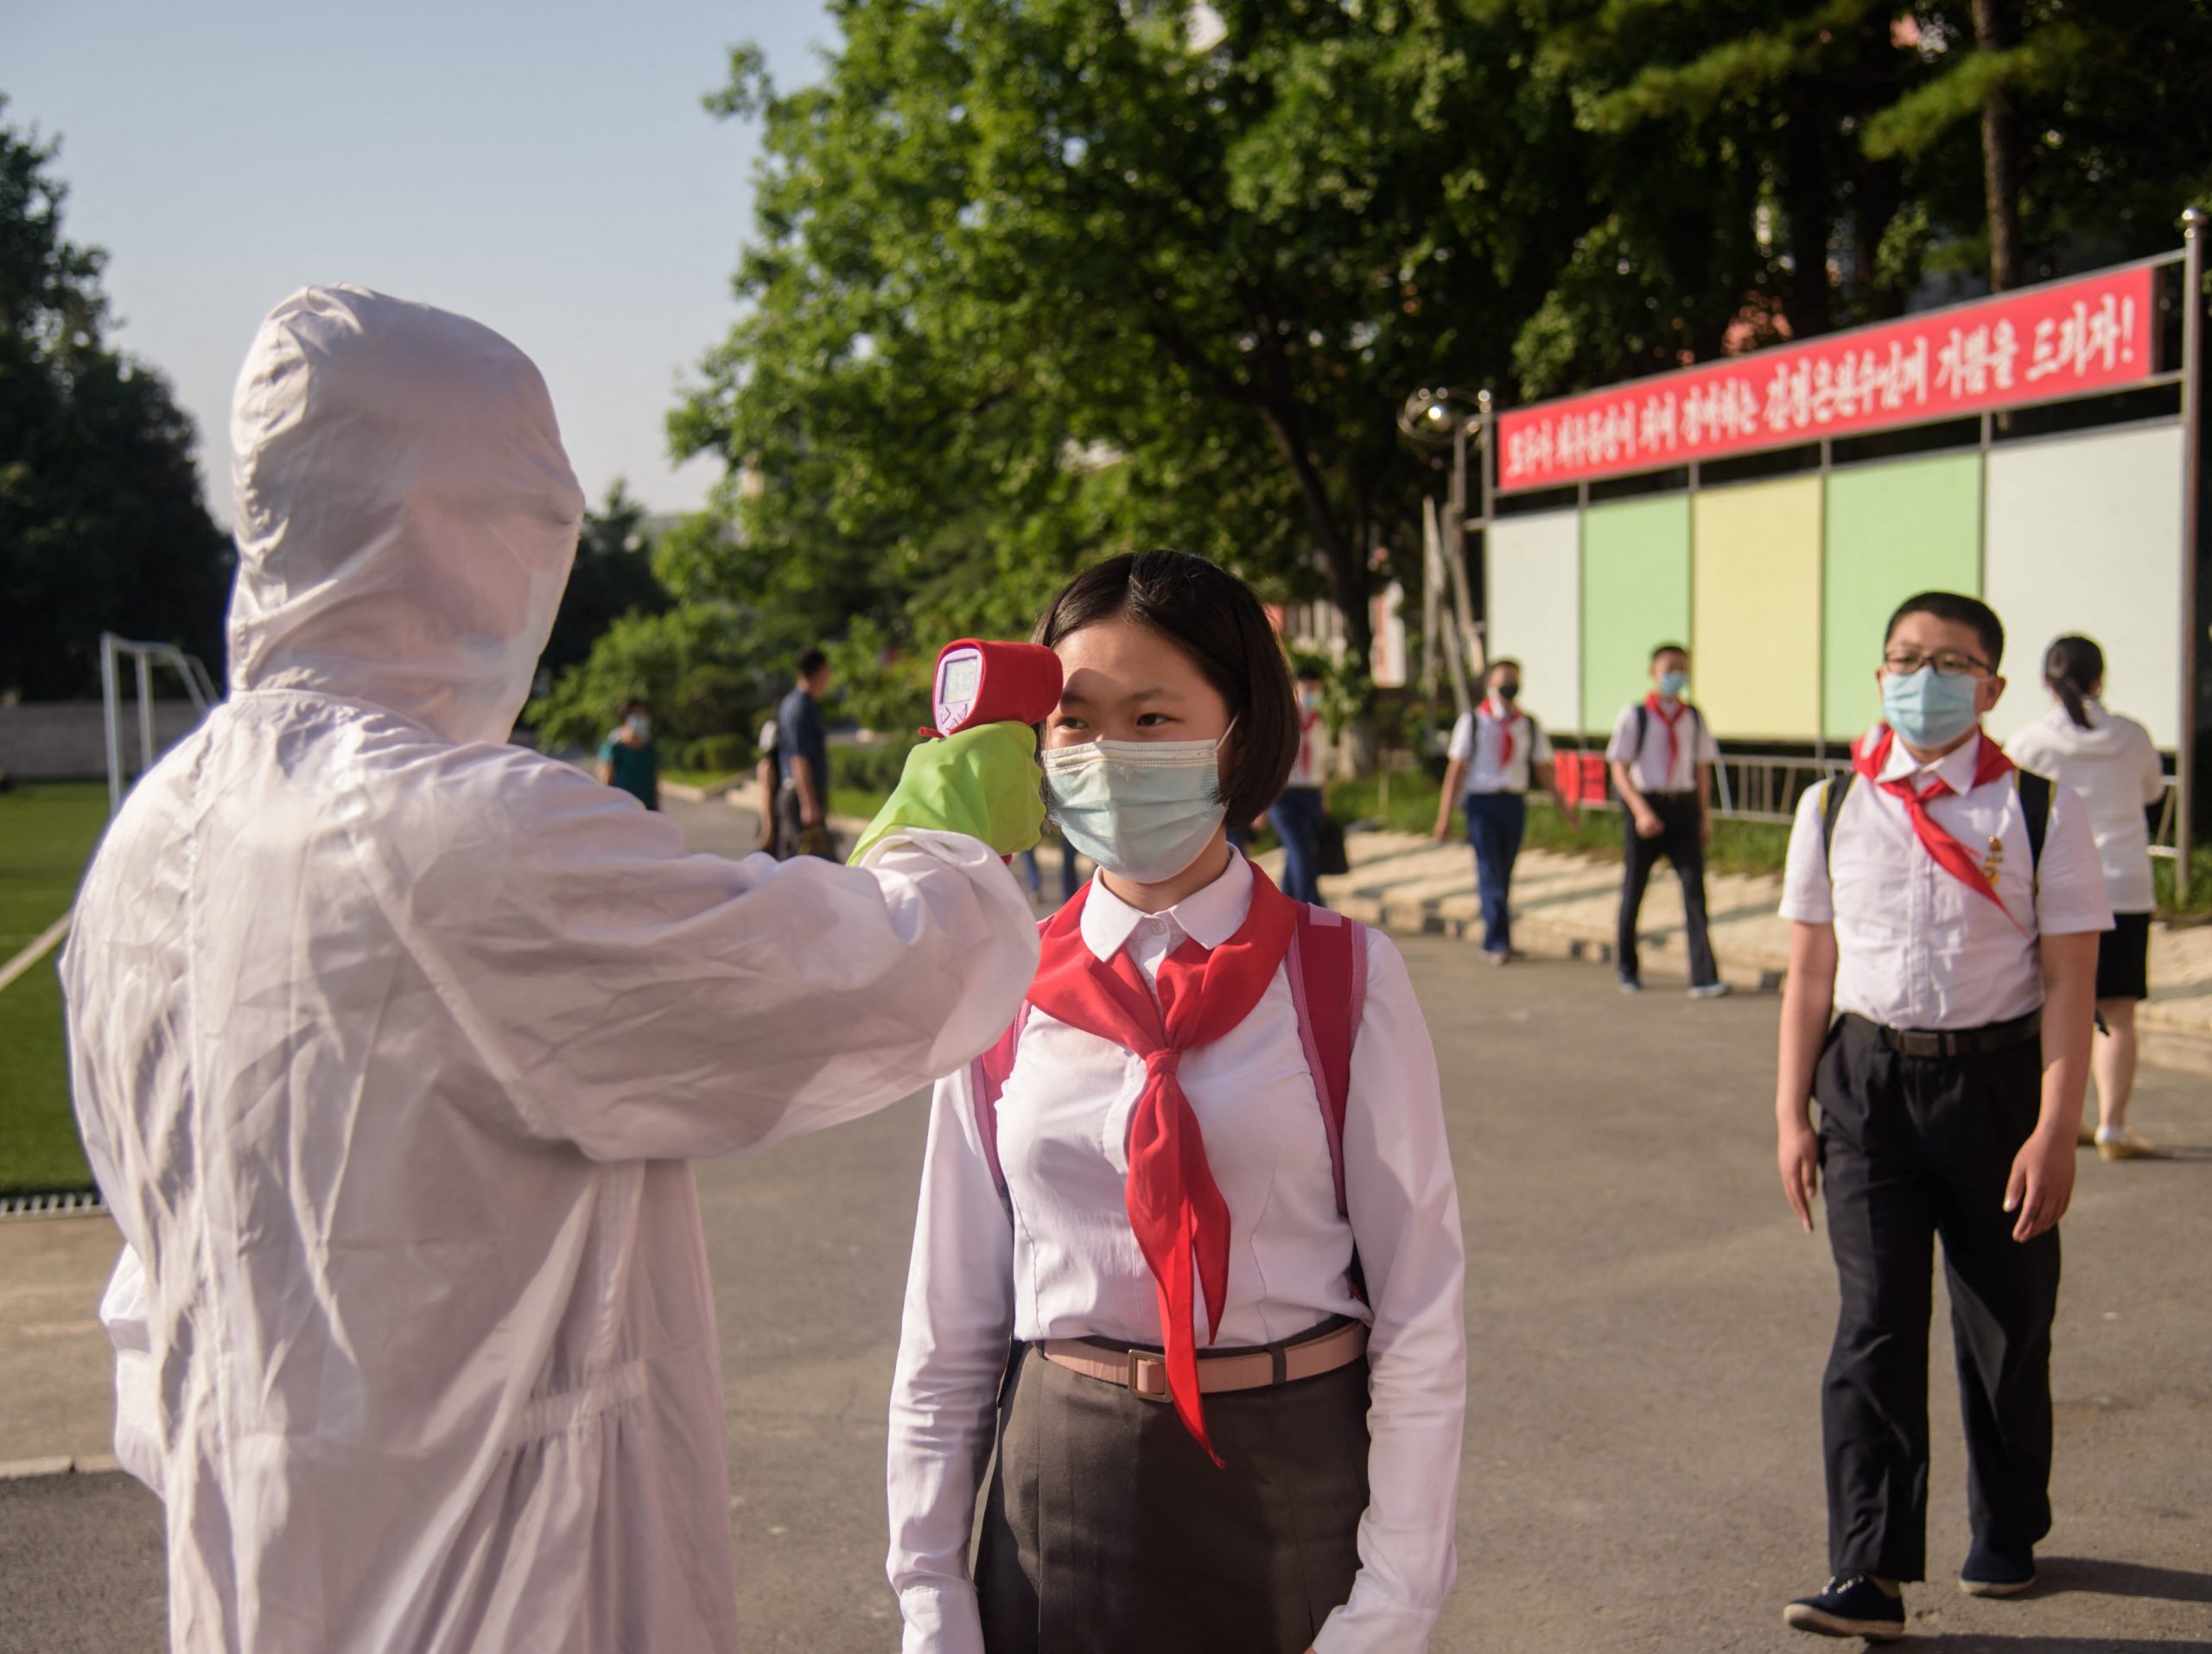 A pupil has her temperature taken as part of anti Covid-19 procedures before entering the Pyongyang Secondary School No. 1 in Pyongyang on June 22, 2021.